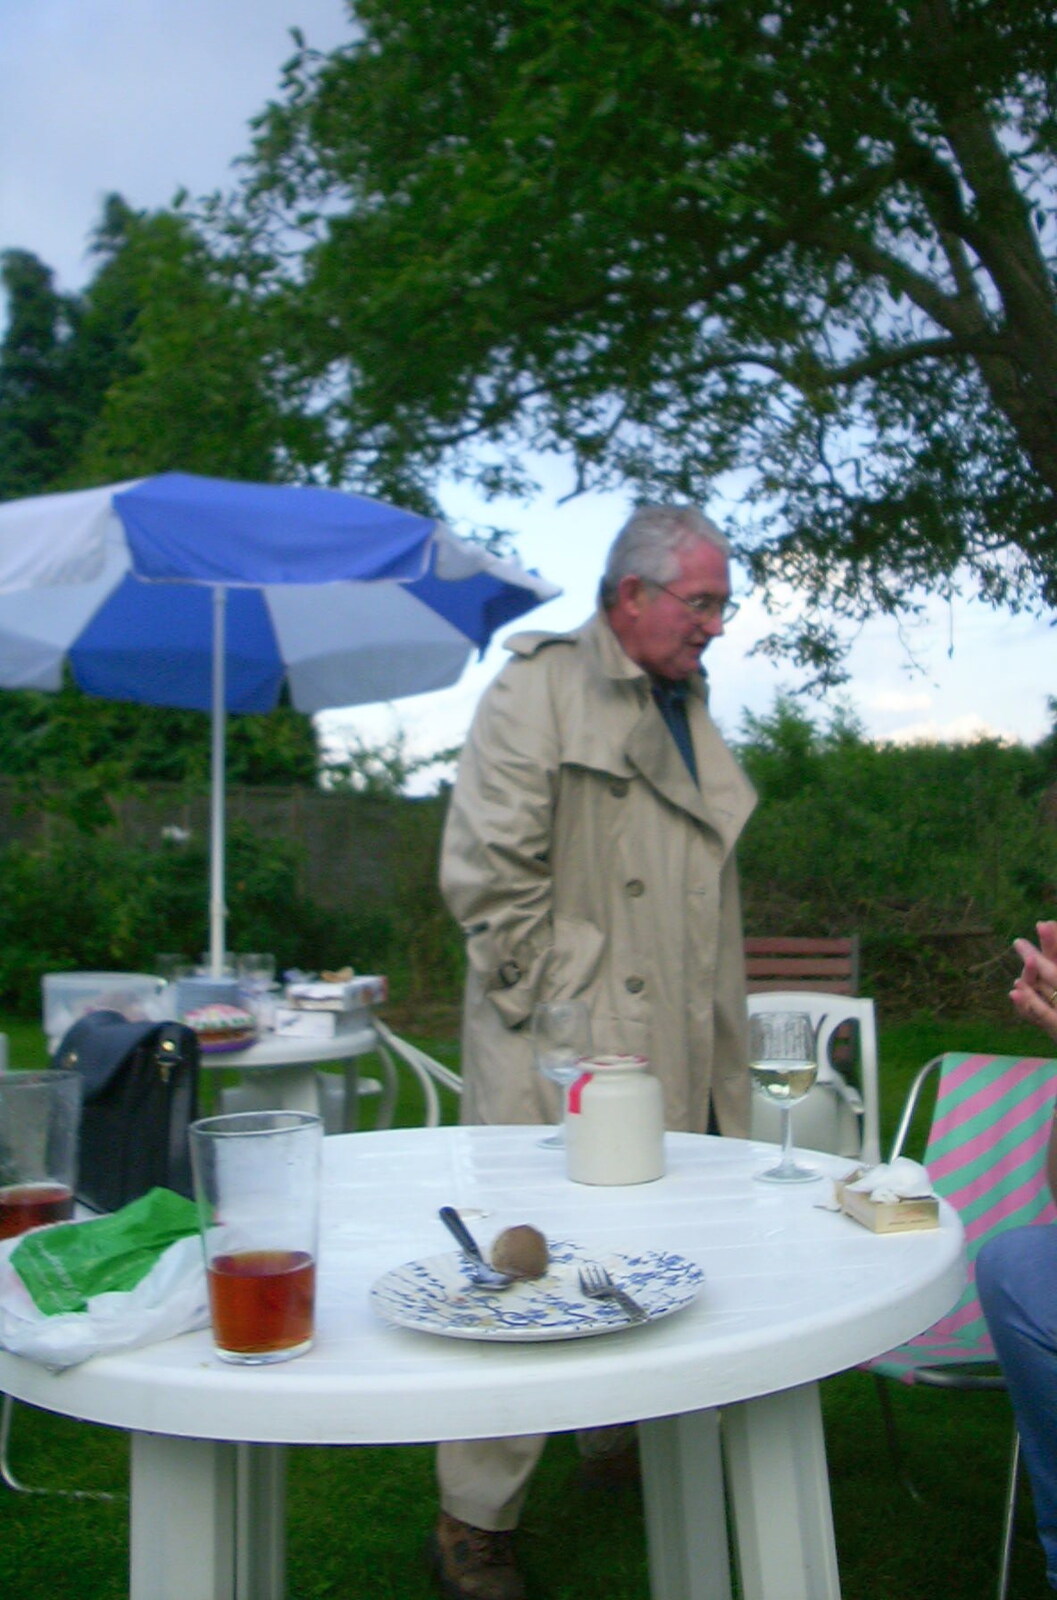 Bomber Langdon does a Columbo impression from Nosher's BSCC Barbeque, Brome, Suffolk - 3rd August 2002